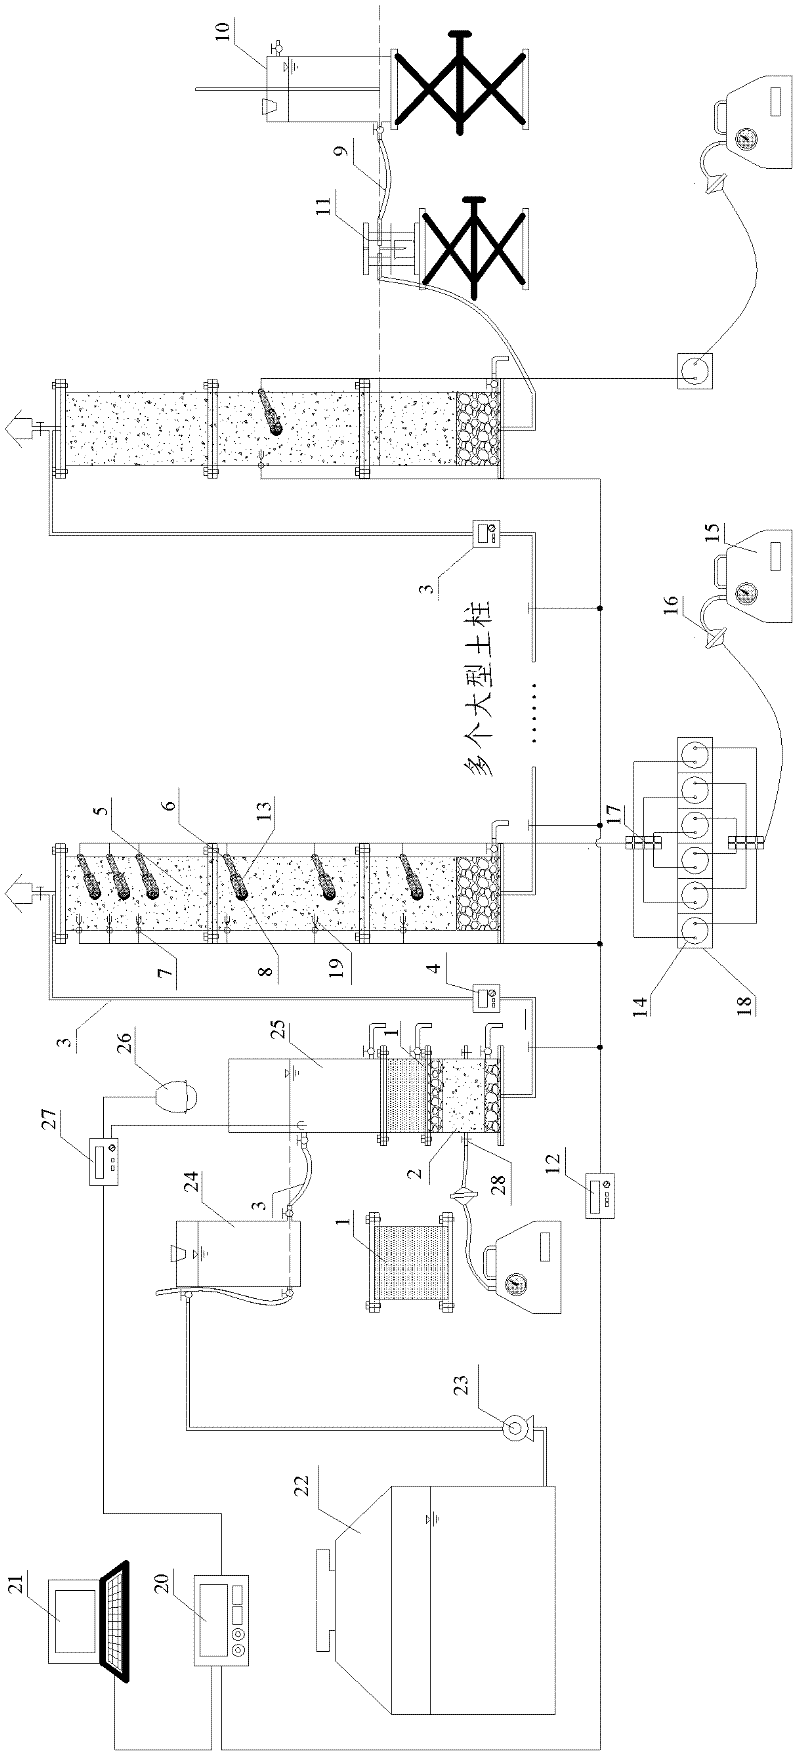 Simulation regulation and control system and method of percolation performance of aeration zone of river or lake